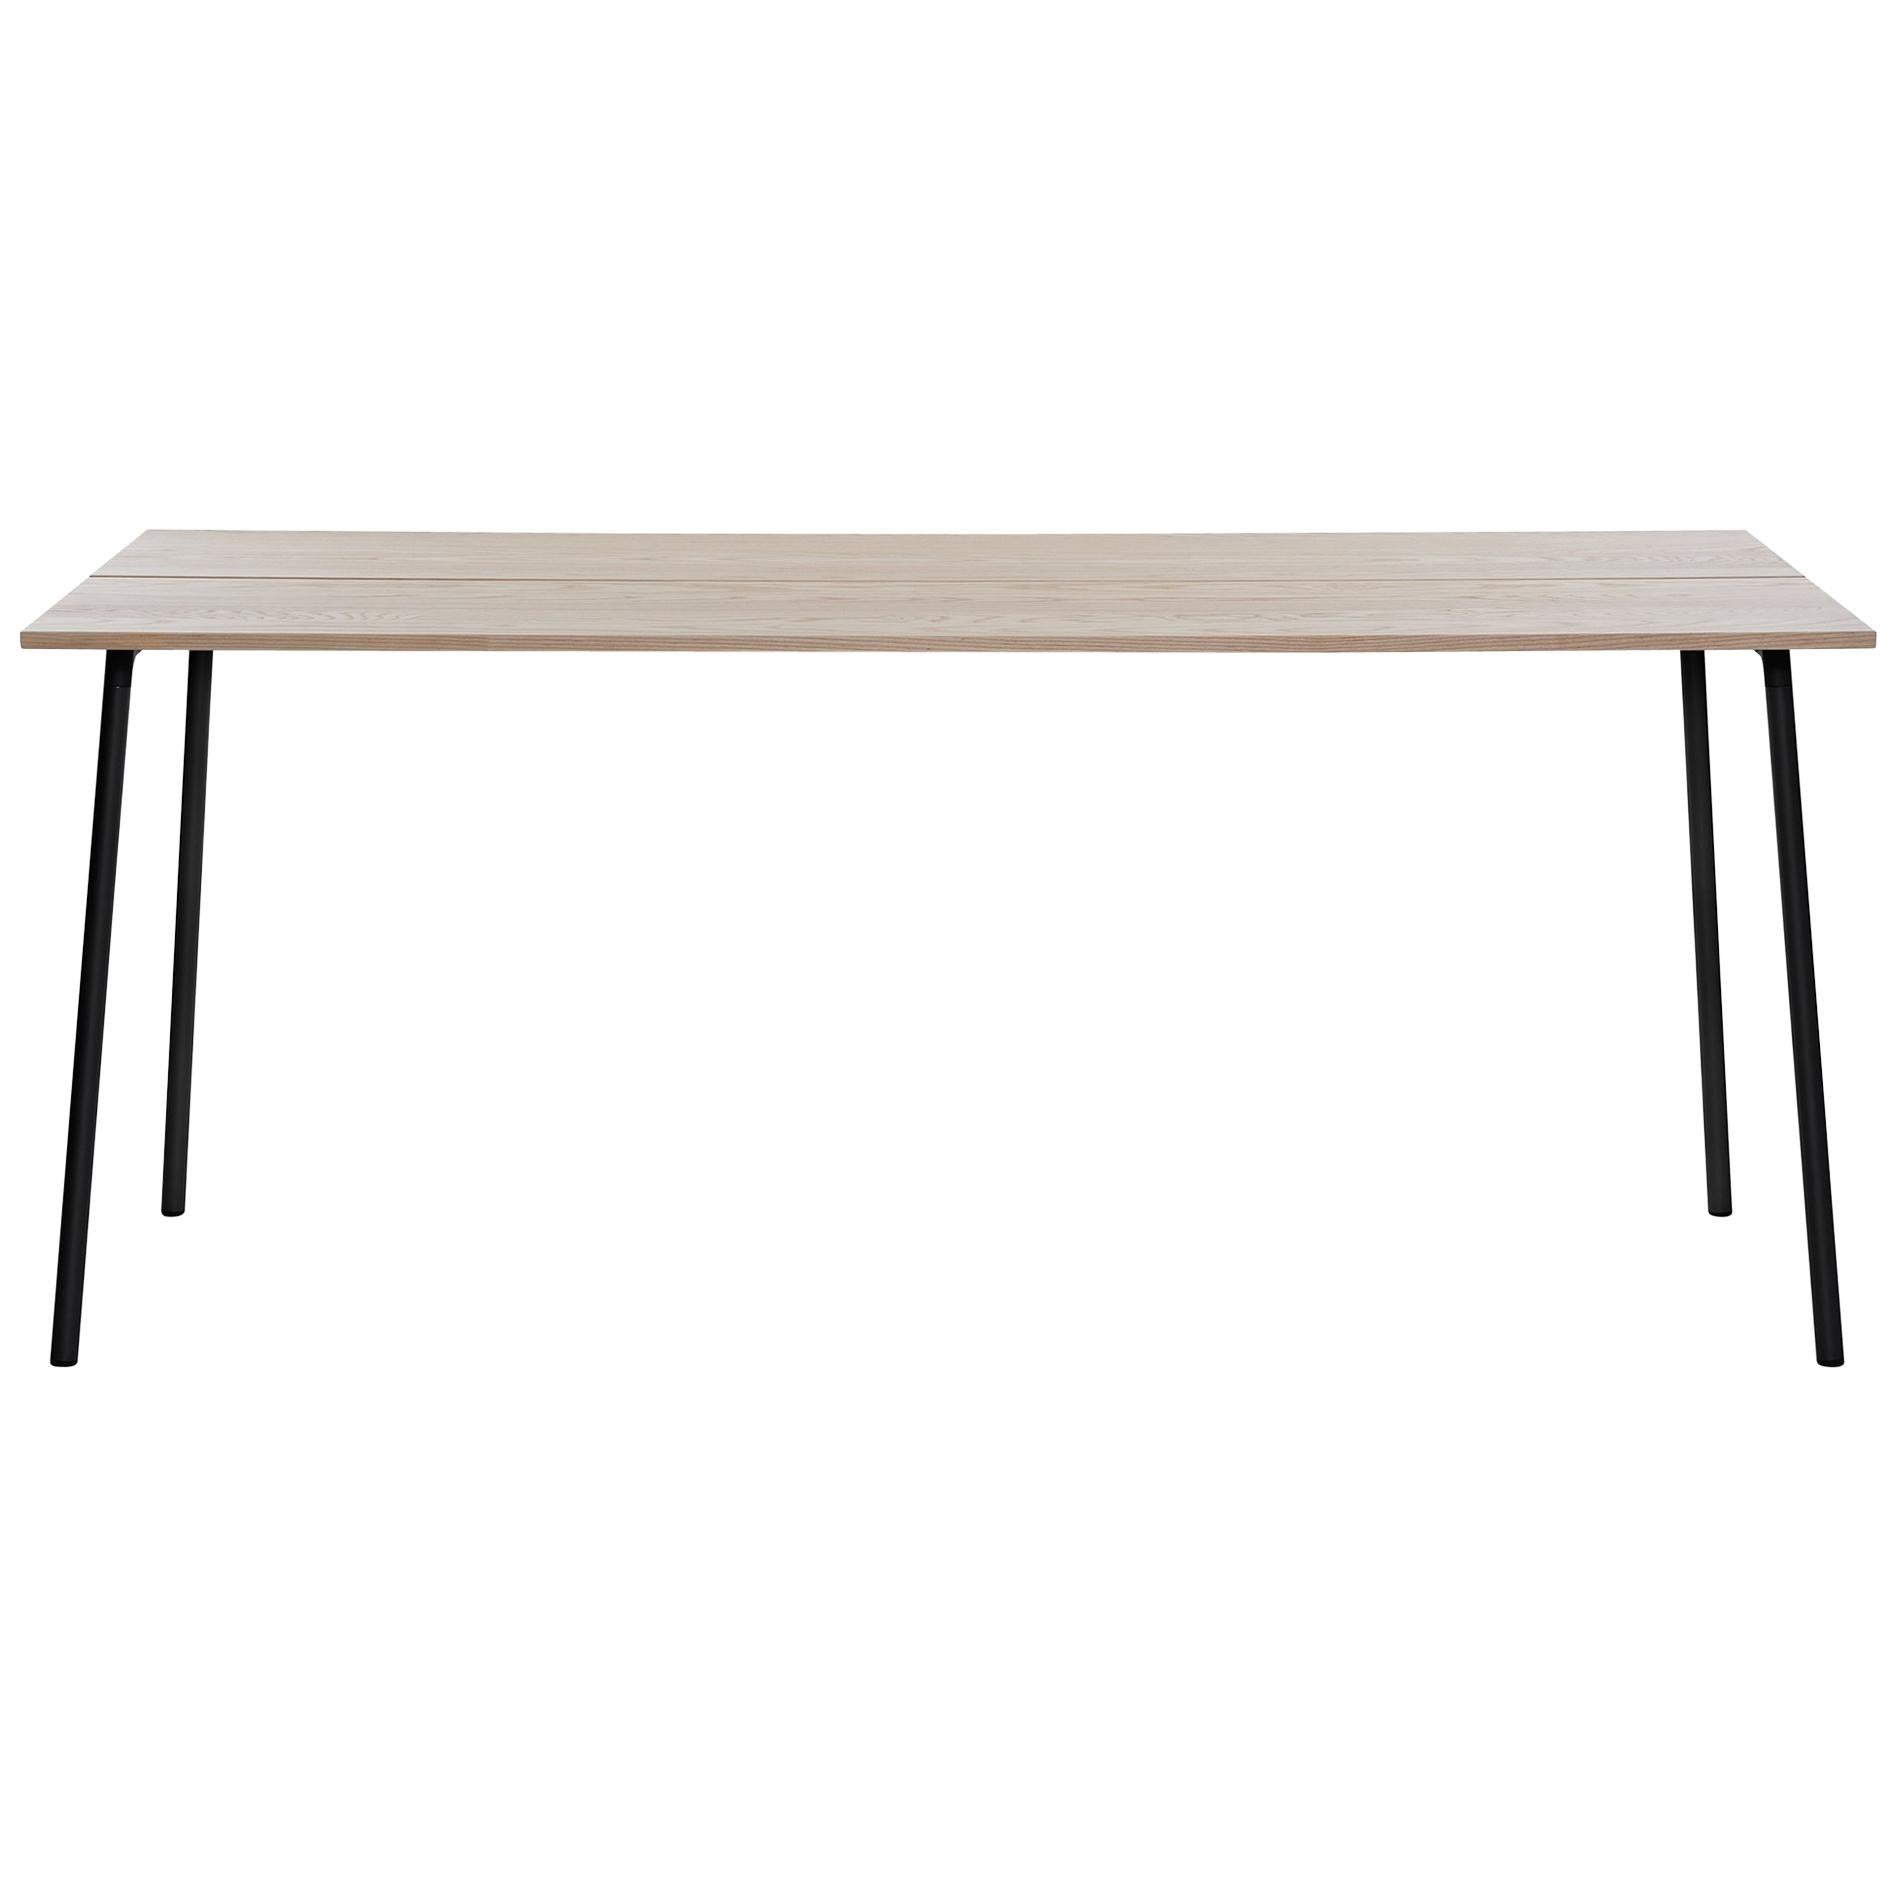 Emeco Run XL High Table in Black Powder-Coat & Ash by Sam Hecht + Kim Colin For Sale